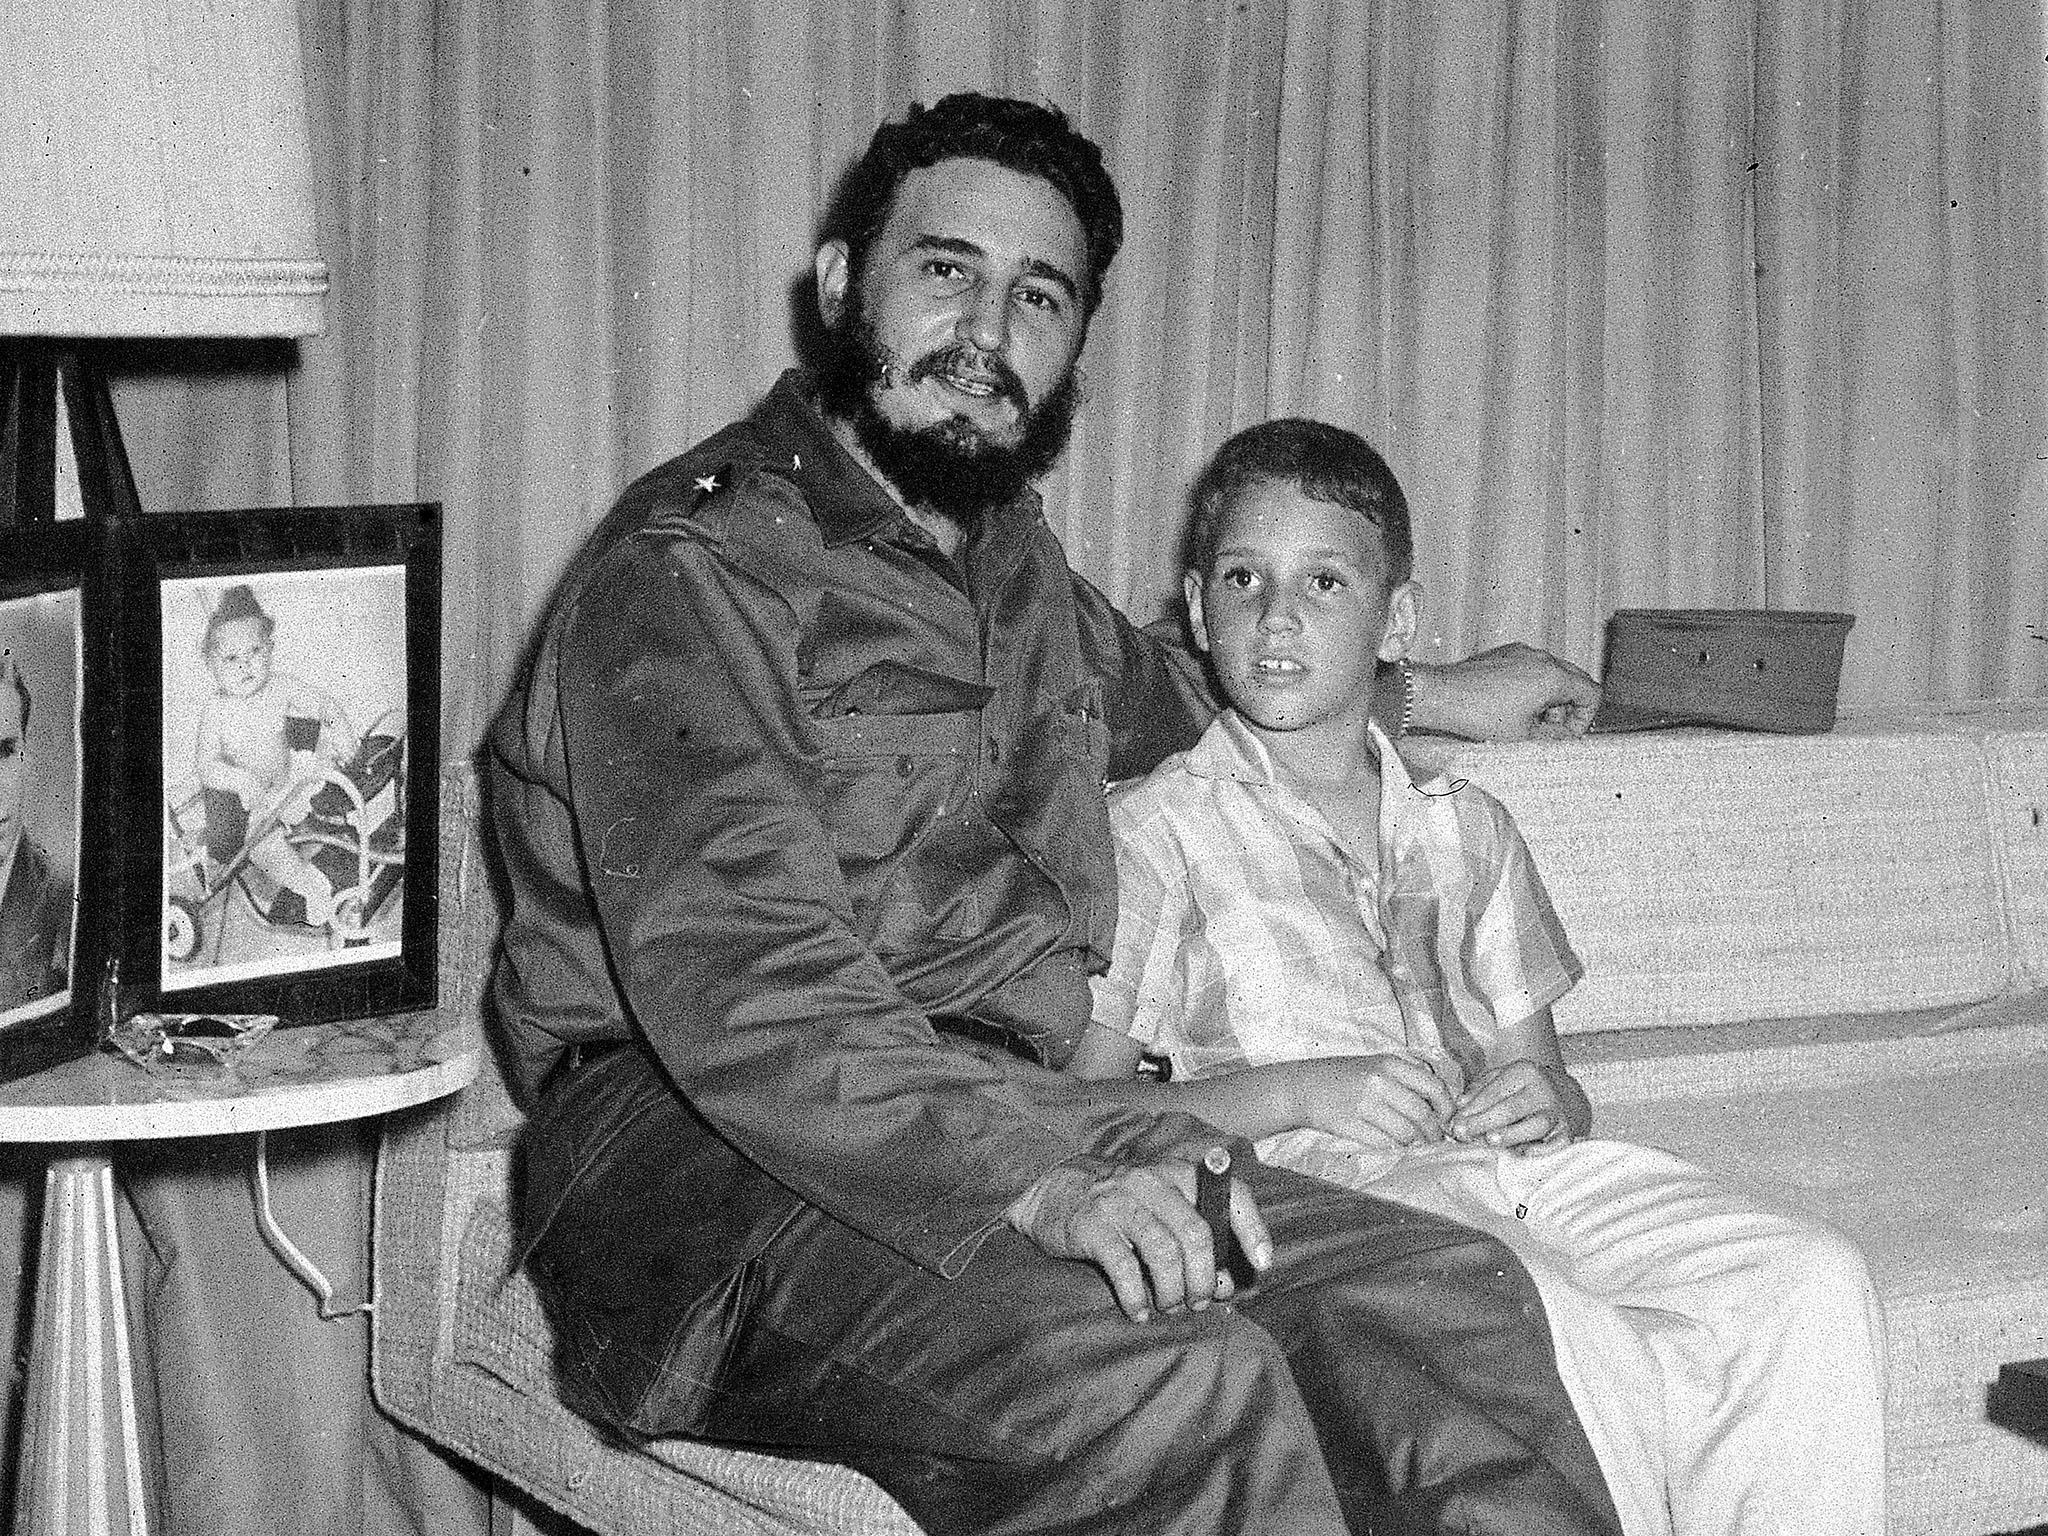 FIDEL LIVES AND WILL LIVE FOREVER